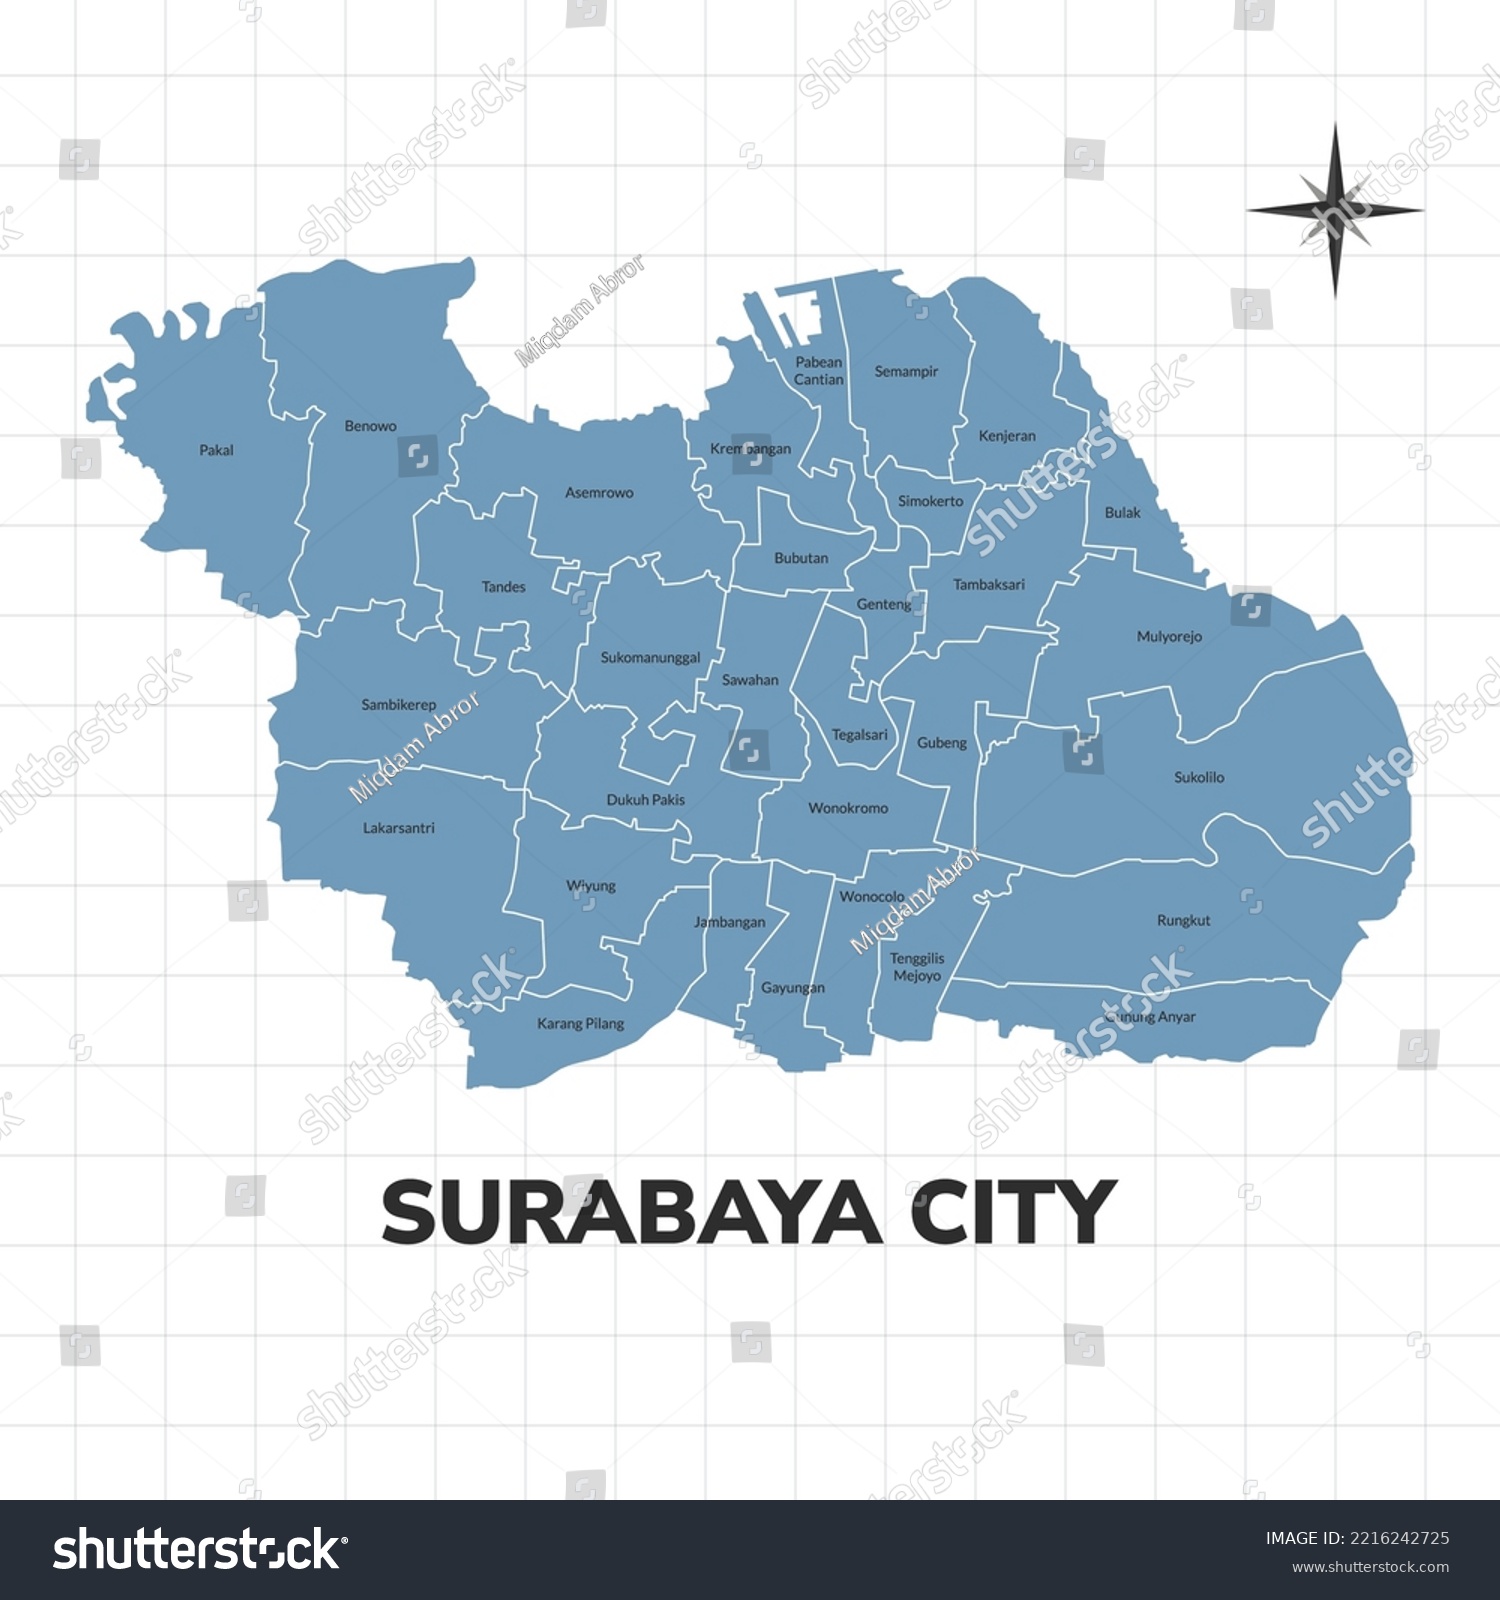 SVG of Surabaya city map illustration. Map of cities in Indonesia svg